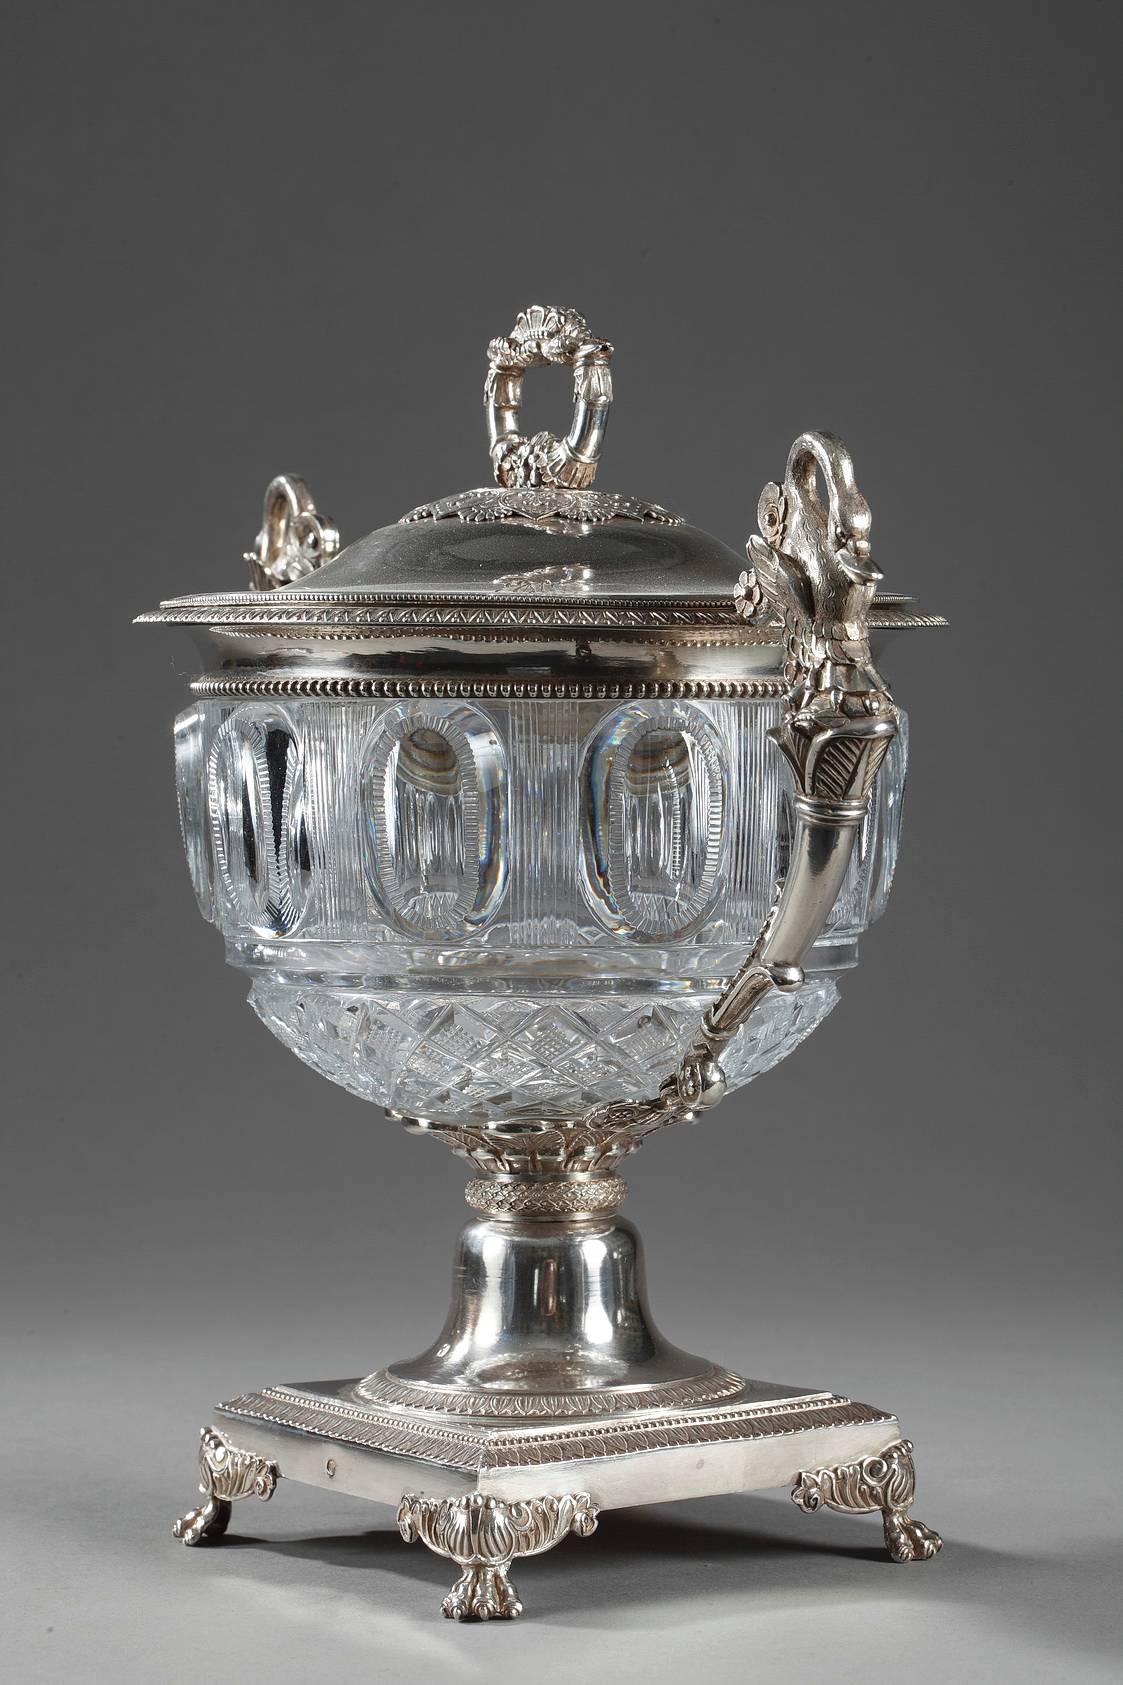 Sizable candy dish in silver and cut crystal from the Restauration period. The body is decorated with diamond cuts and ovals in relief. The handles that extend to the base are sculpted with swans, small flowers, and foliage. The monogrammed lid is